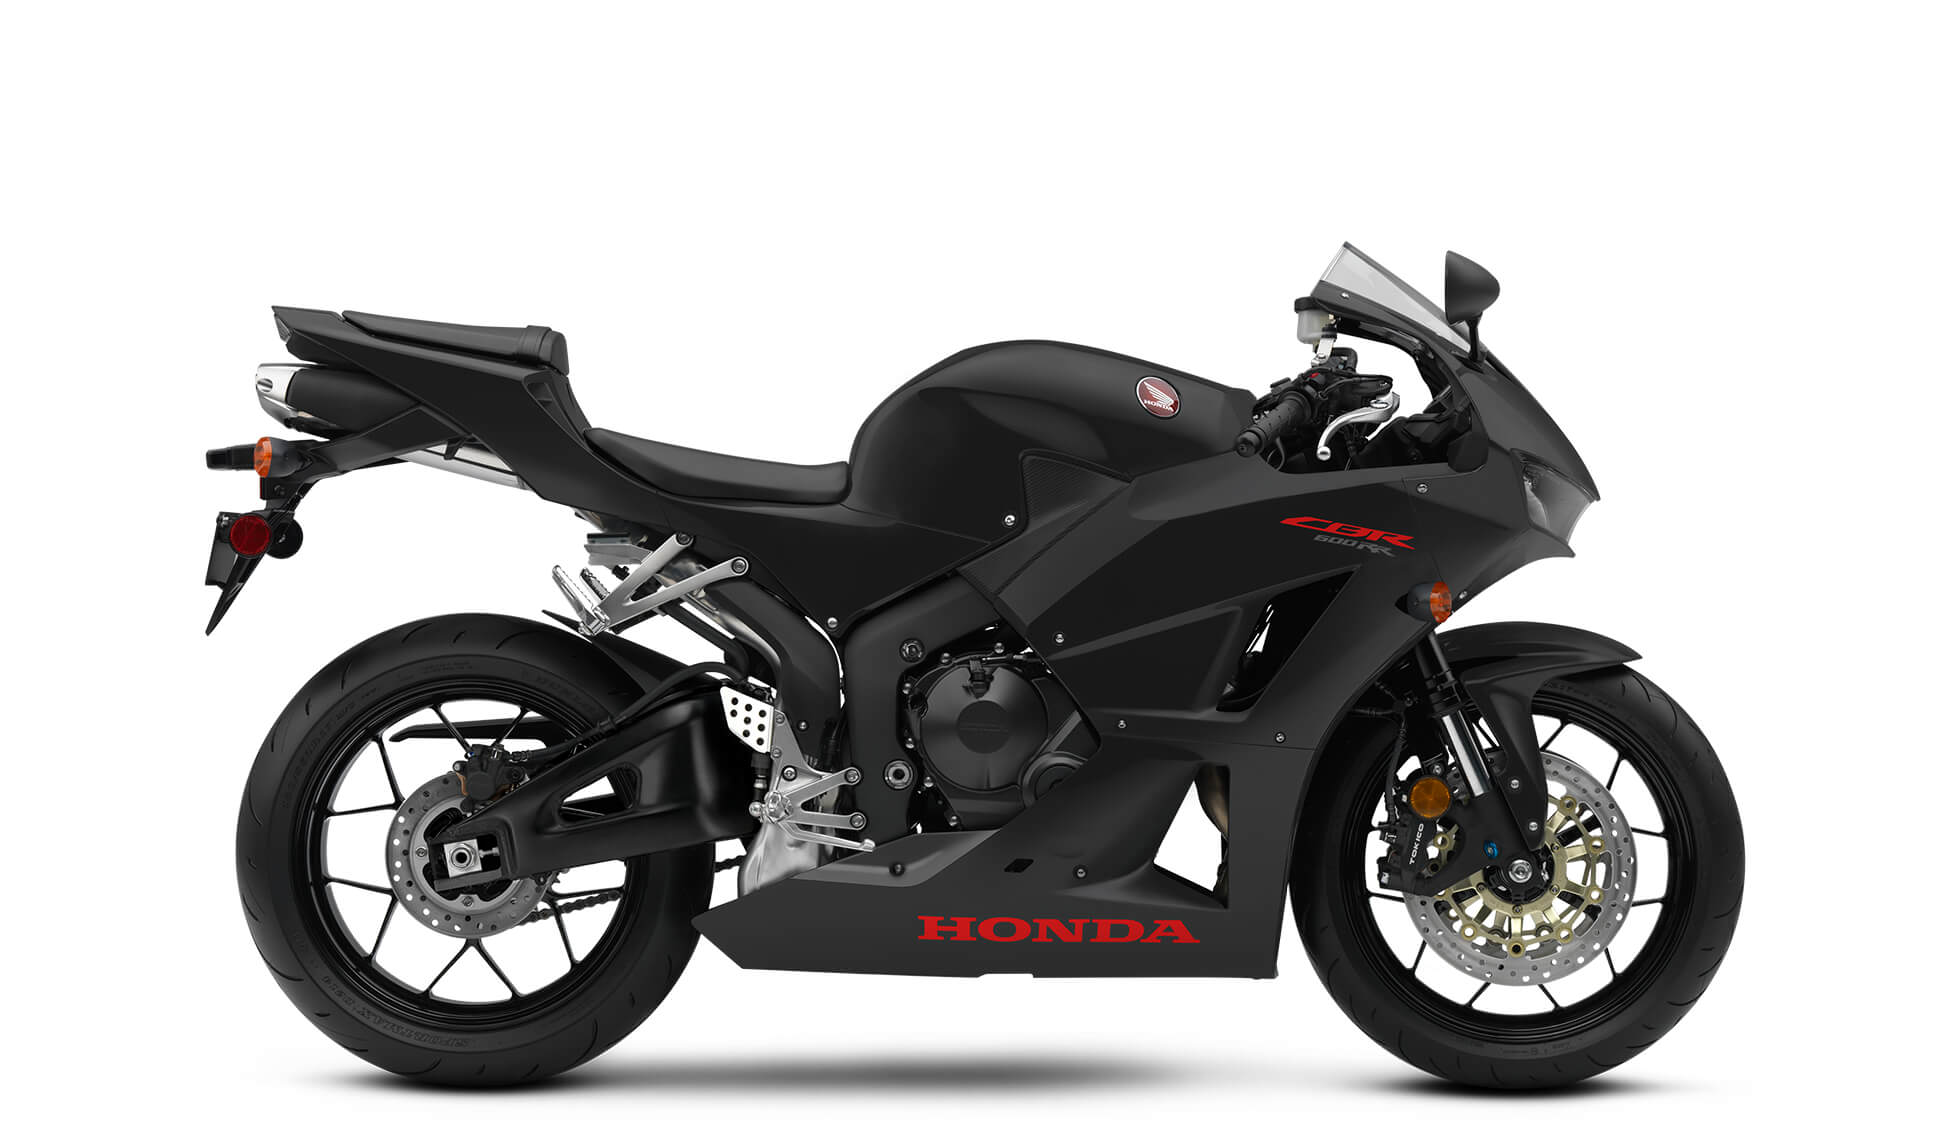 2021 Honda CBR600RR-R in the works? - Motorcycle news, Motorcycle ...